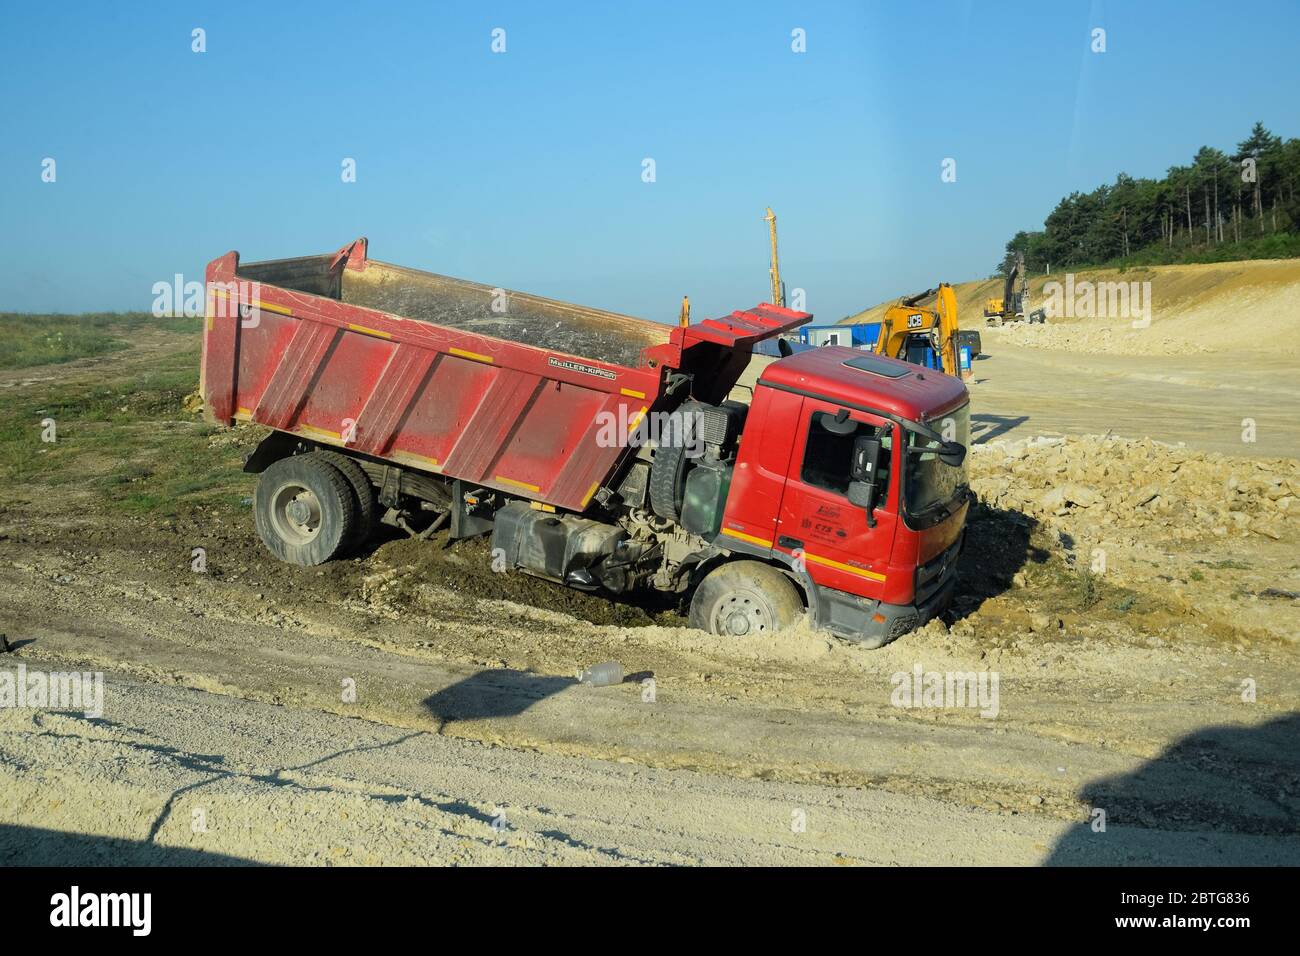 Taman, Russia - June 9, 2019: A dump truck kamaz got stuck in the mud on the side of the road. Stock Photo